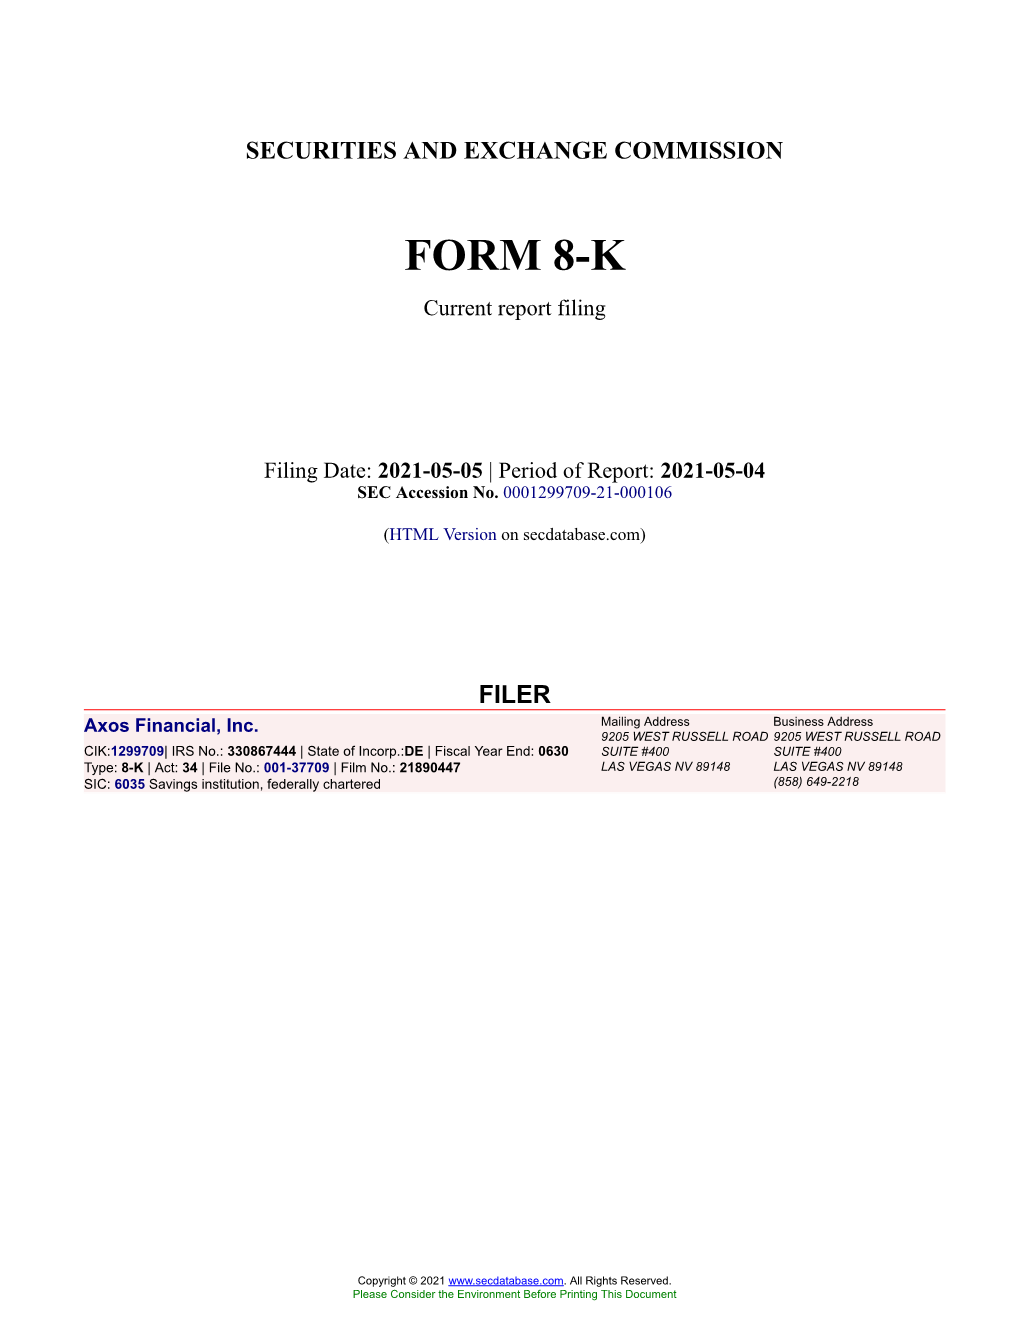 Axos Financial, Inc. Form 8-K Current Event Report Filed 2021-05-05